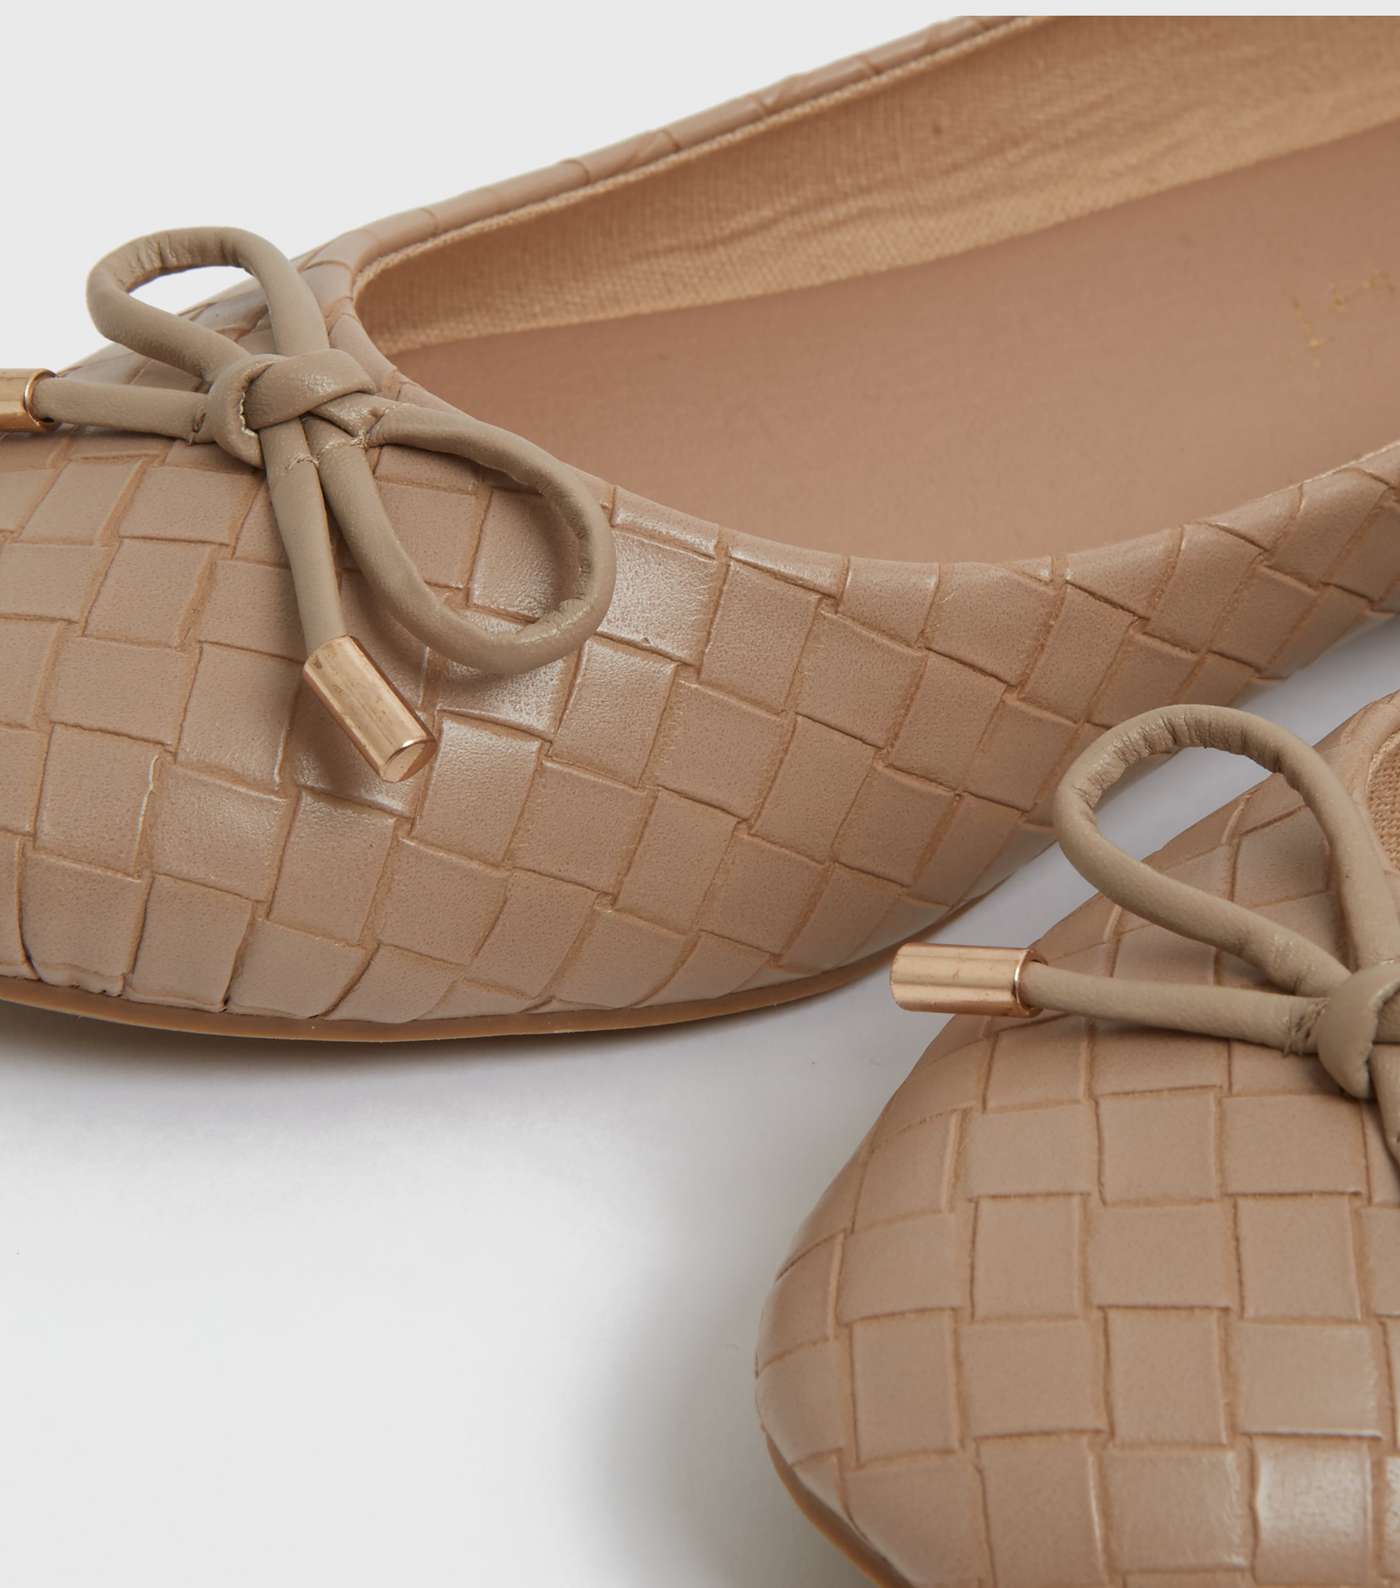 Stone Woven Leather-Look Bow Ballet Pumps Image 4